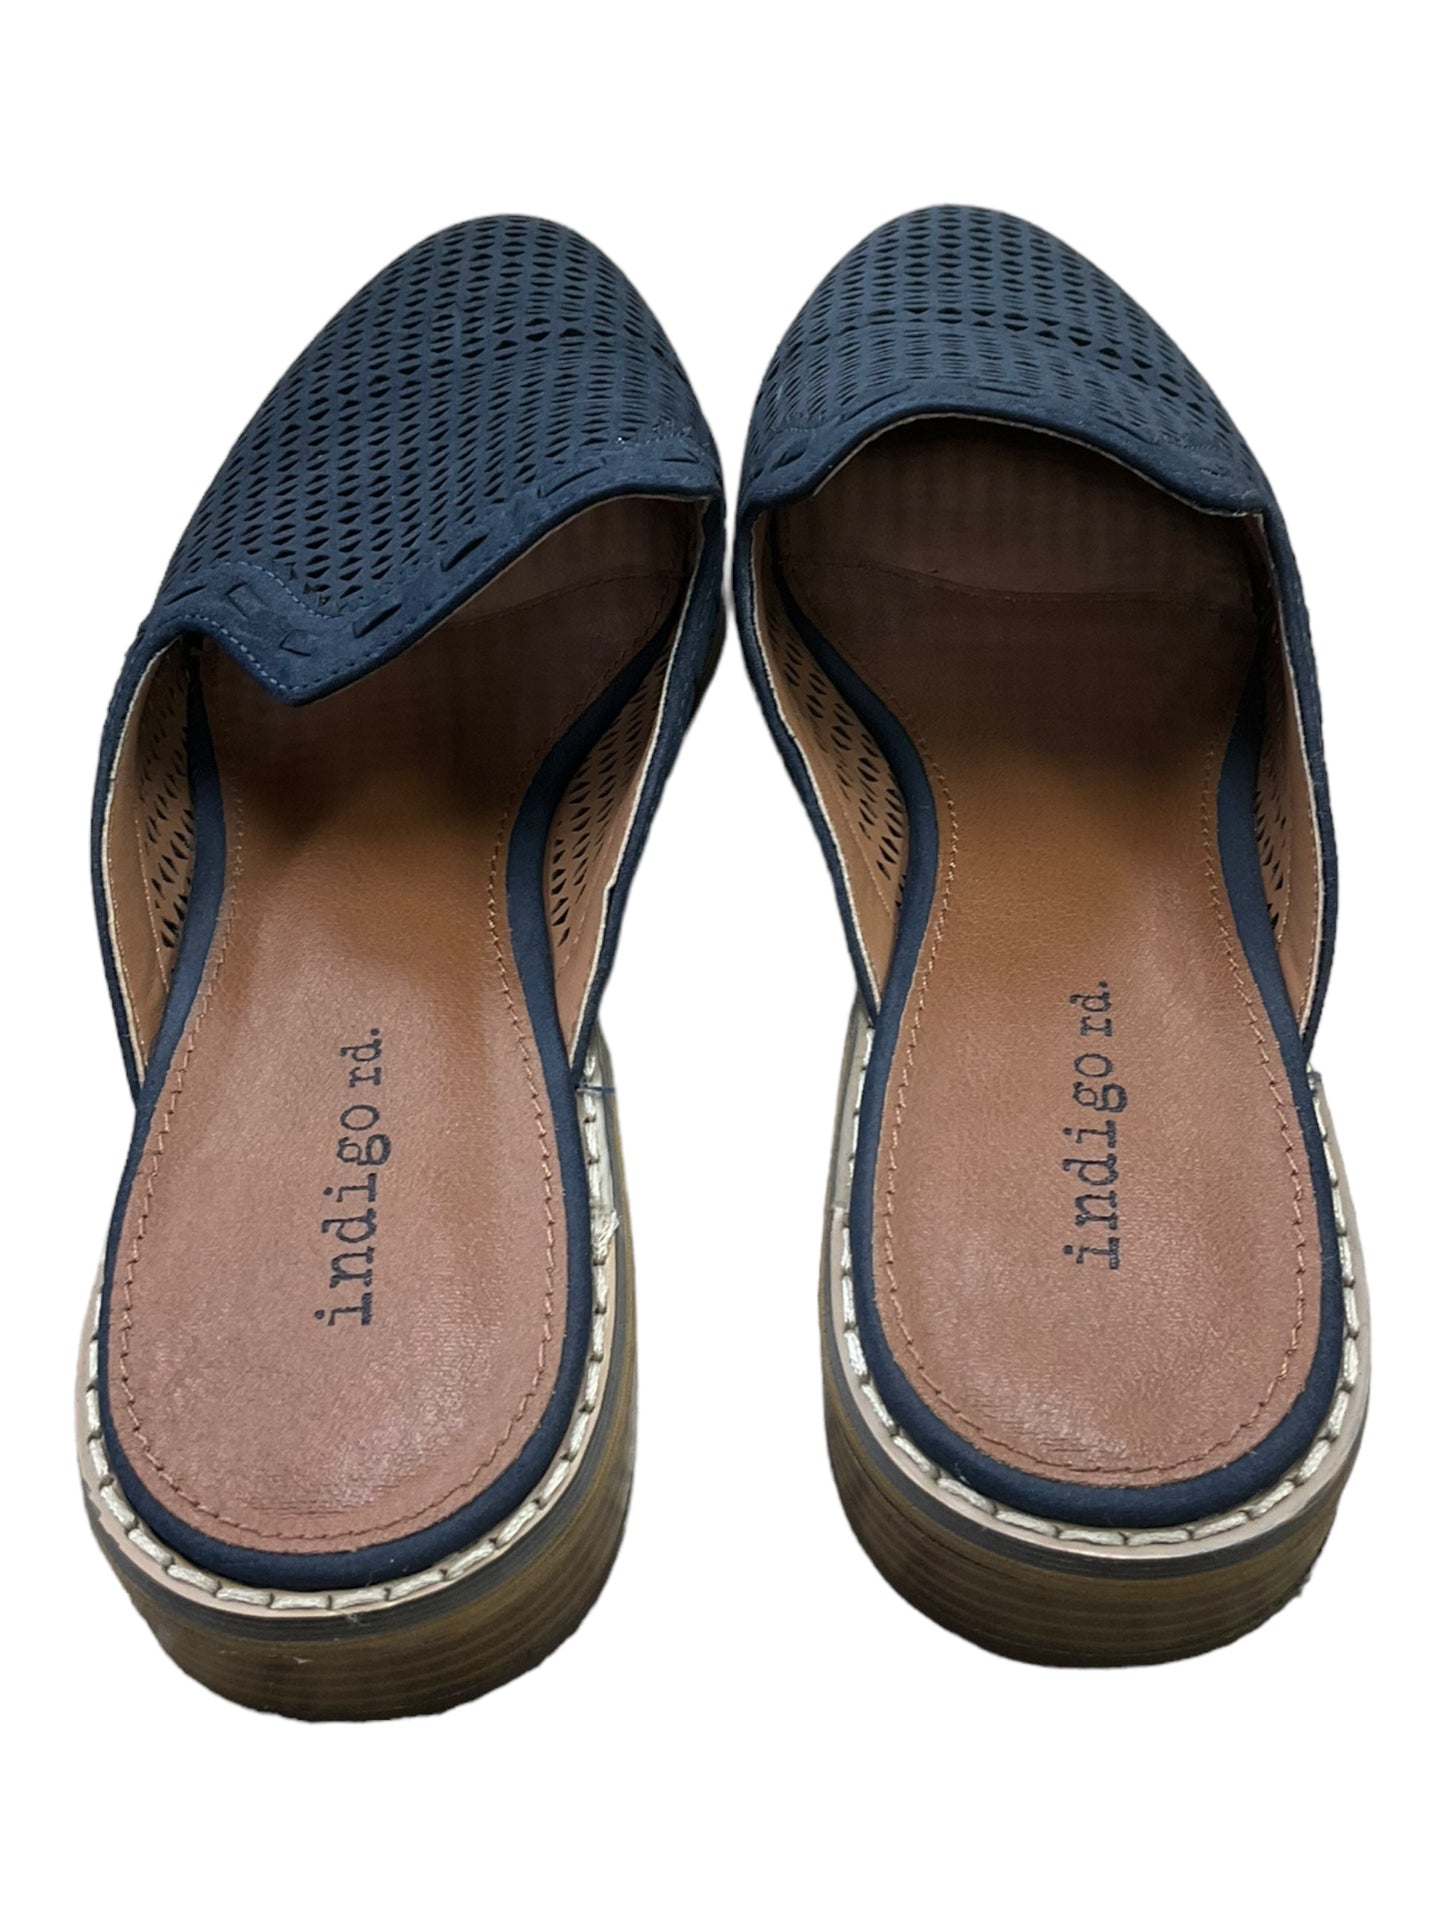 Shoes Flats By Indigo Rd  Size: 7